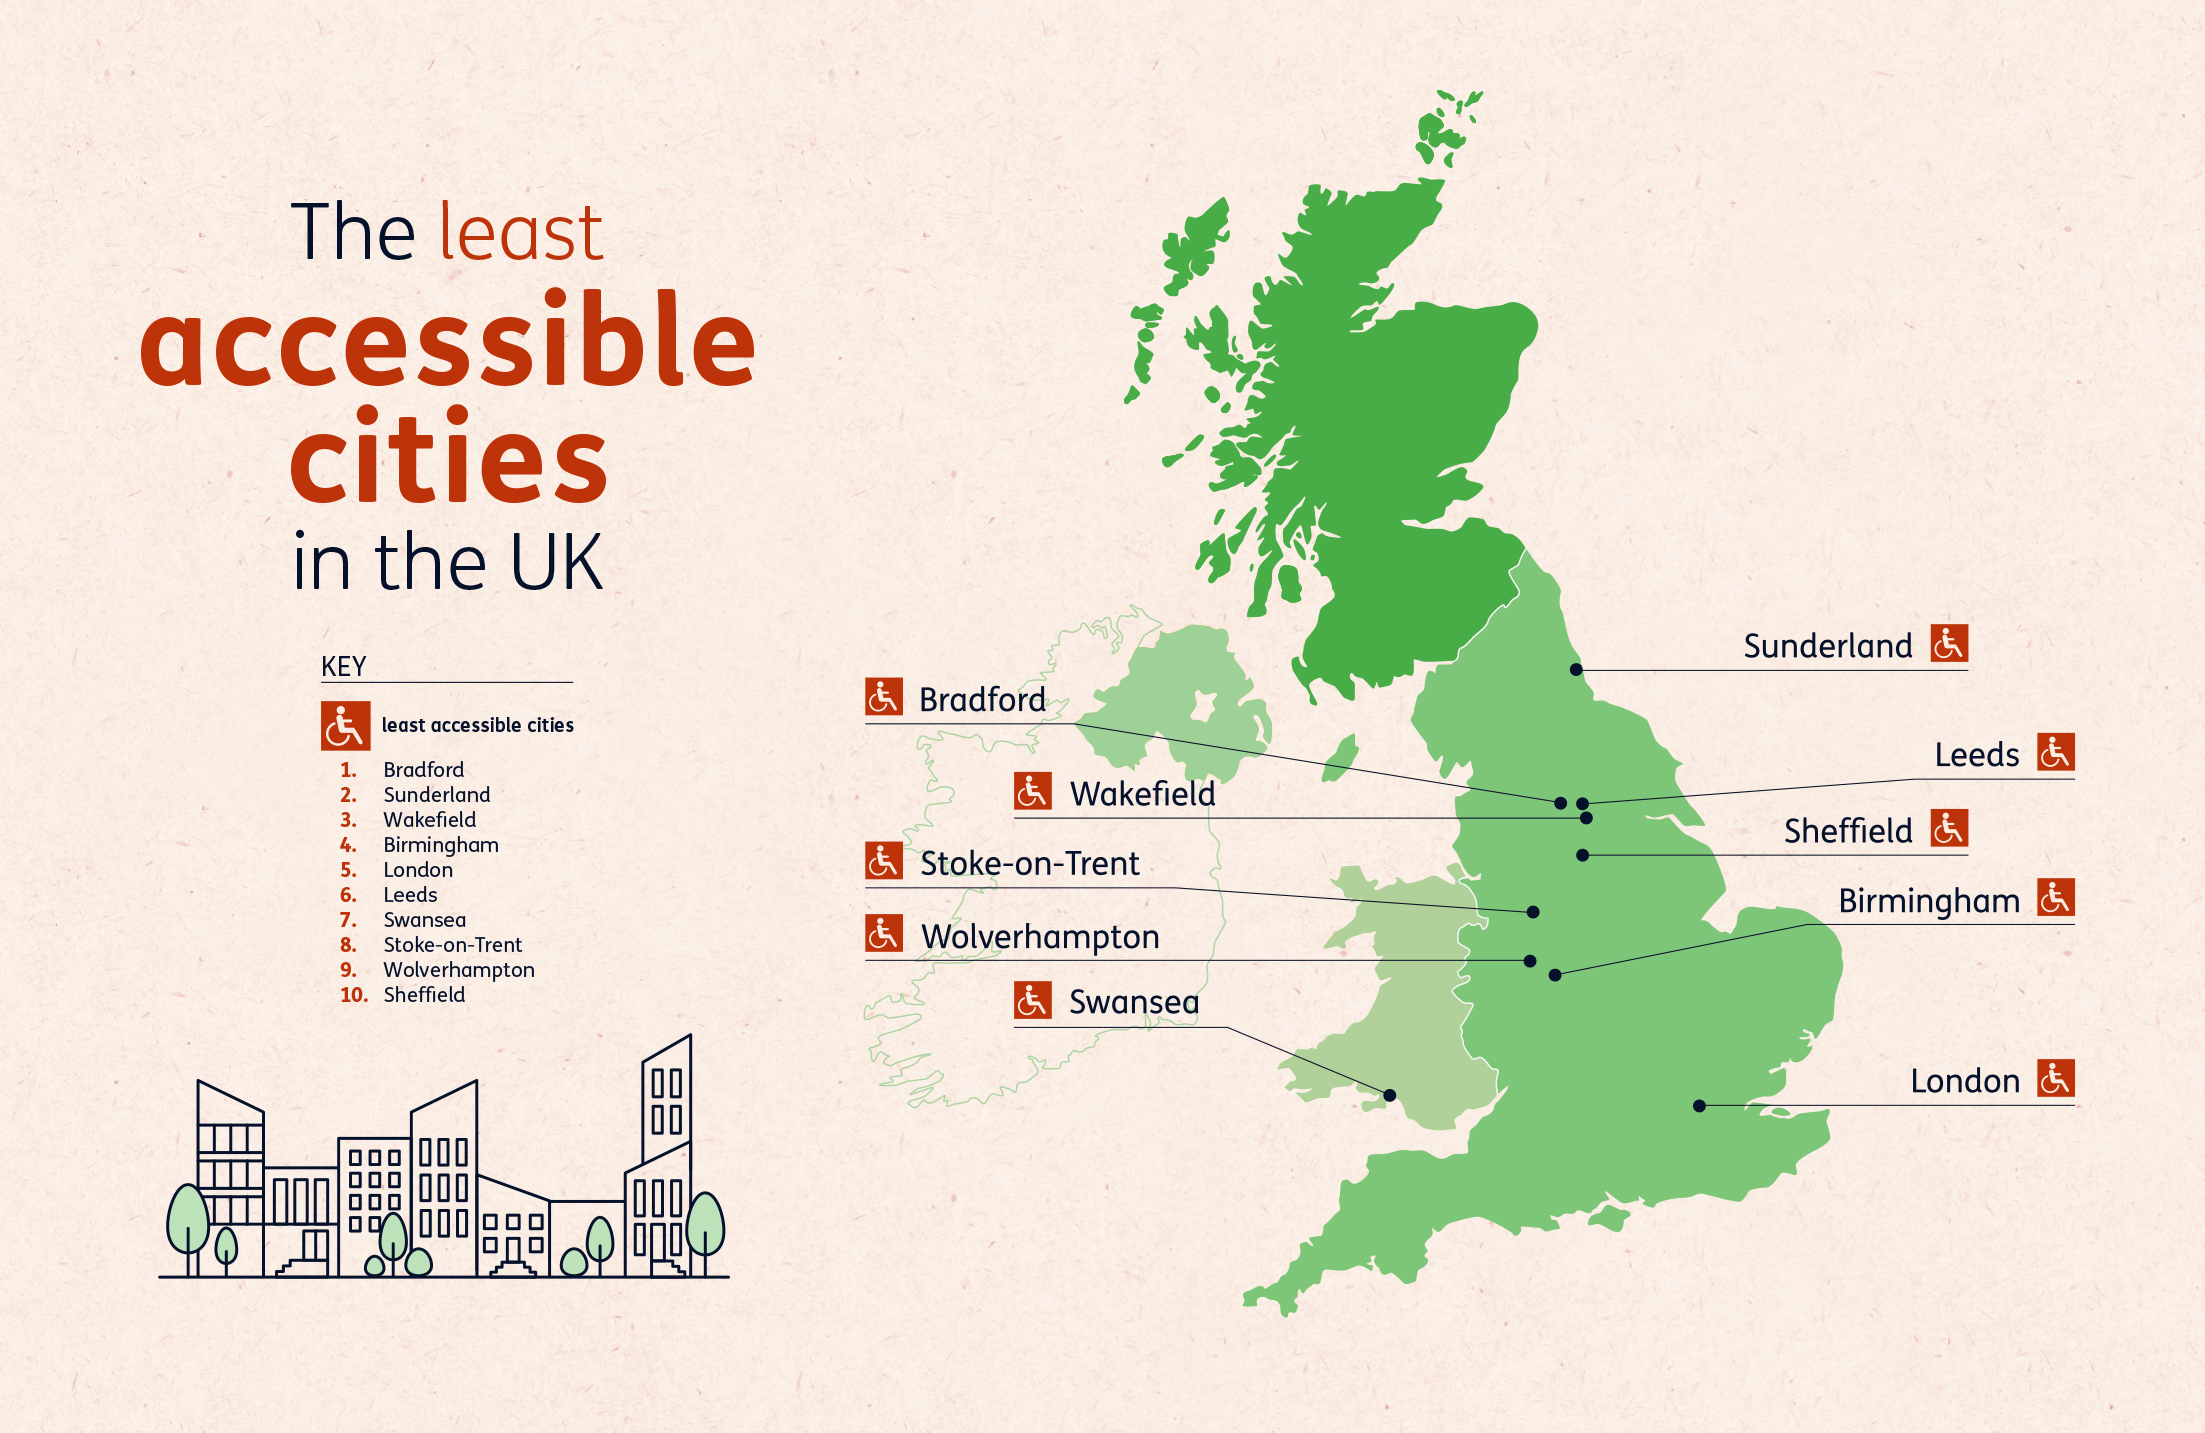 The least accessible cities in the UK